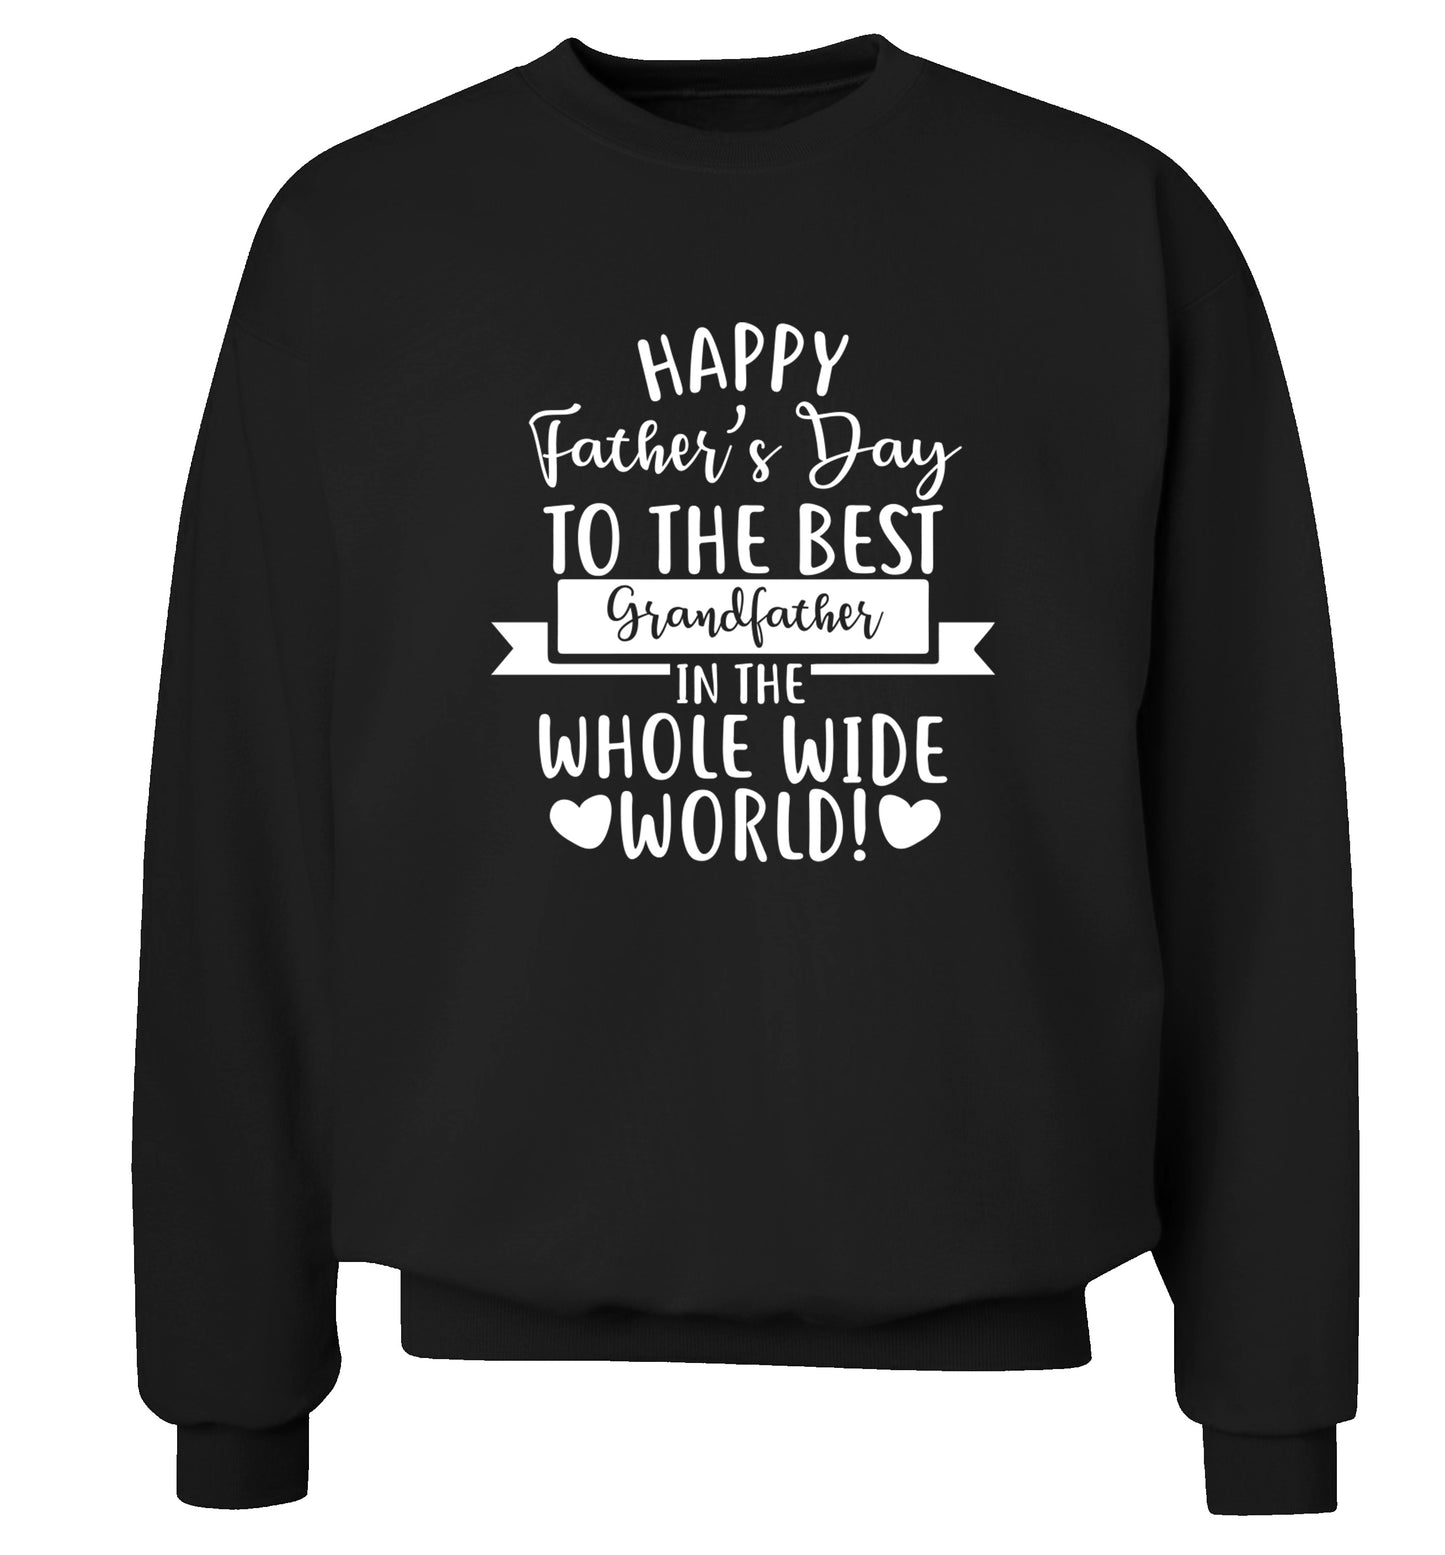 Happy Father's Day to the best grandfather in the world Adult's unisex black Sweater 2XL